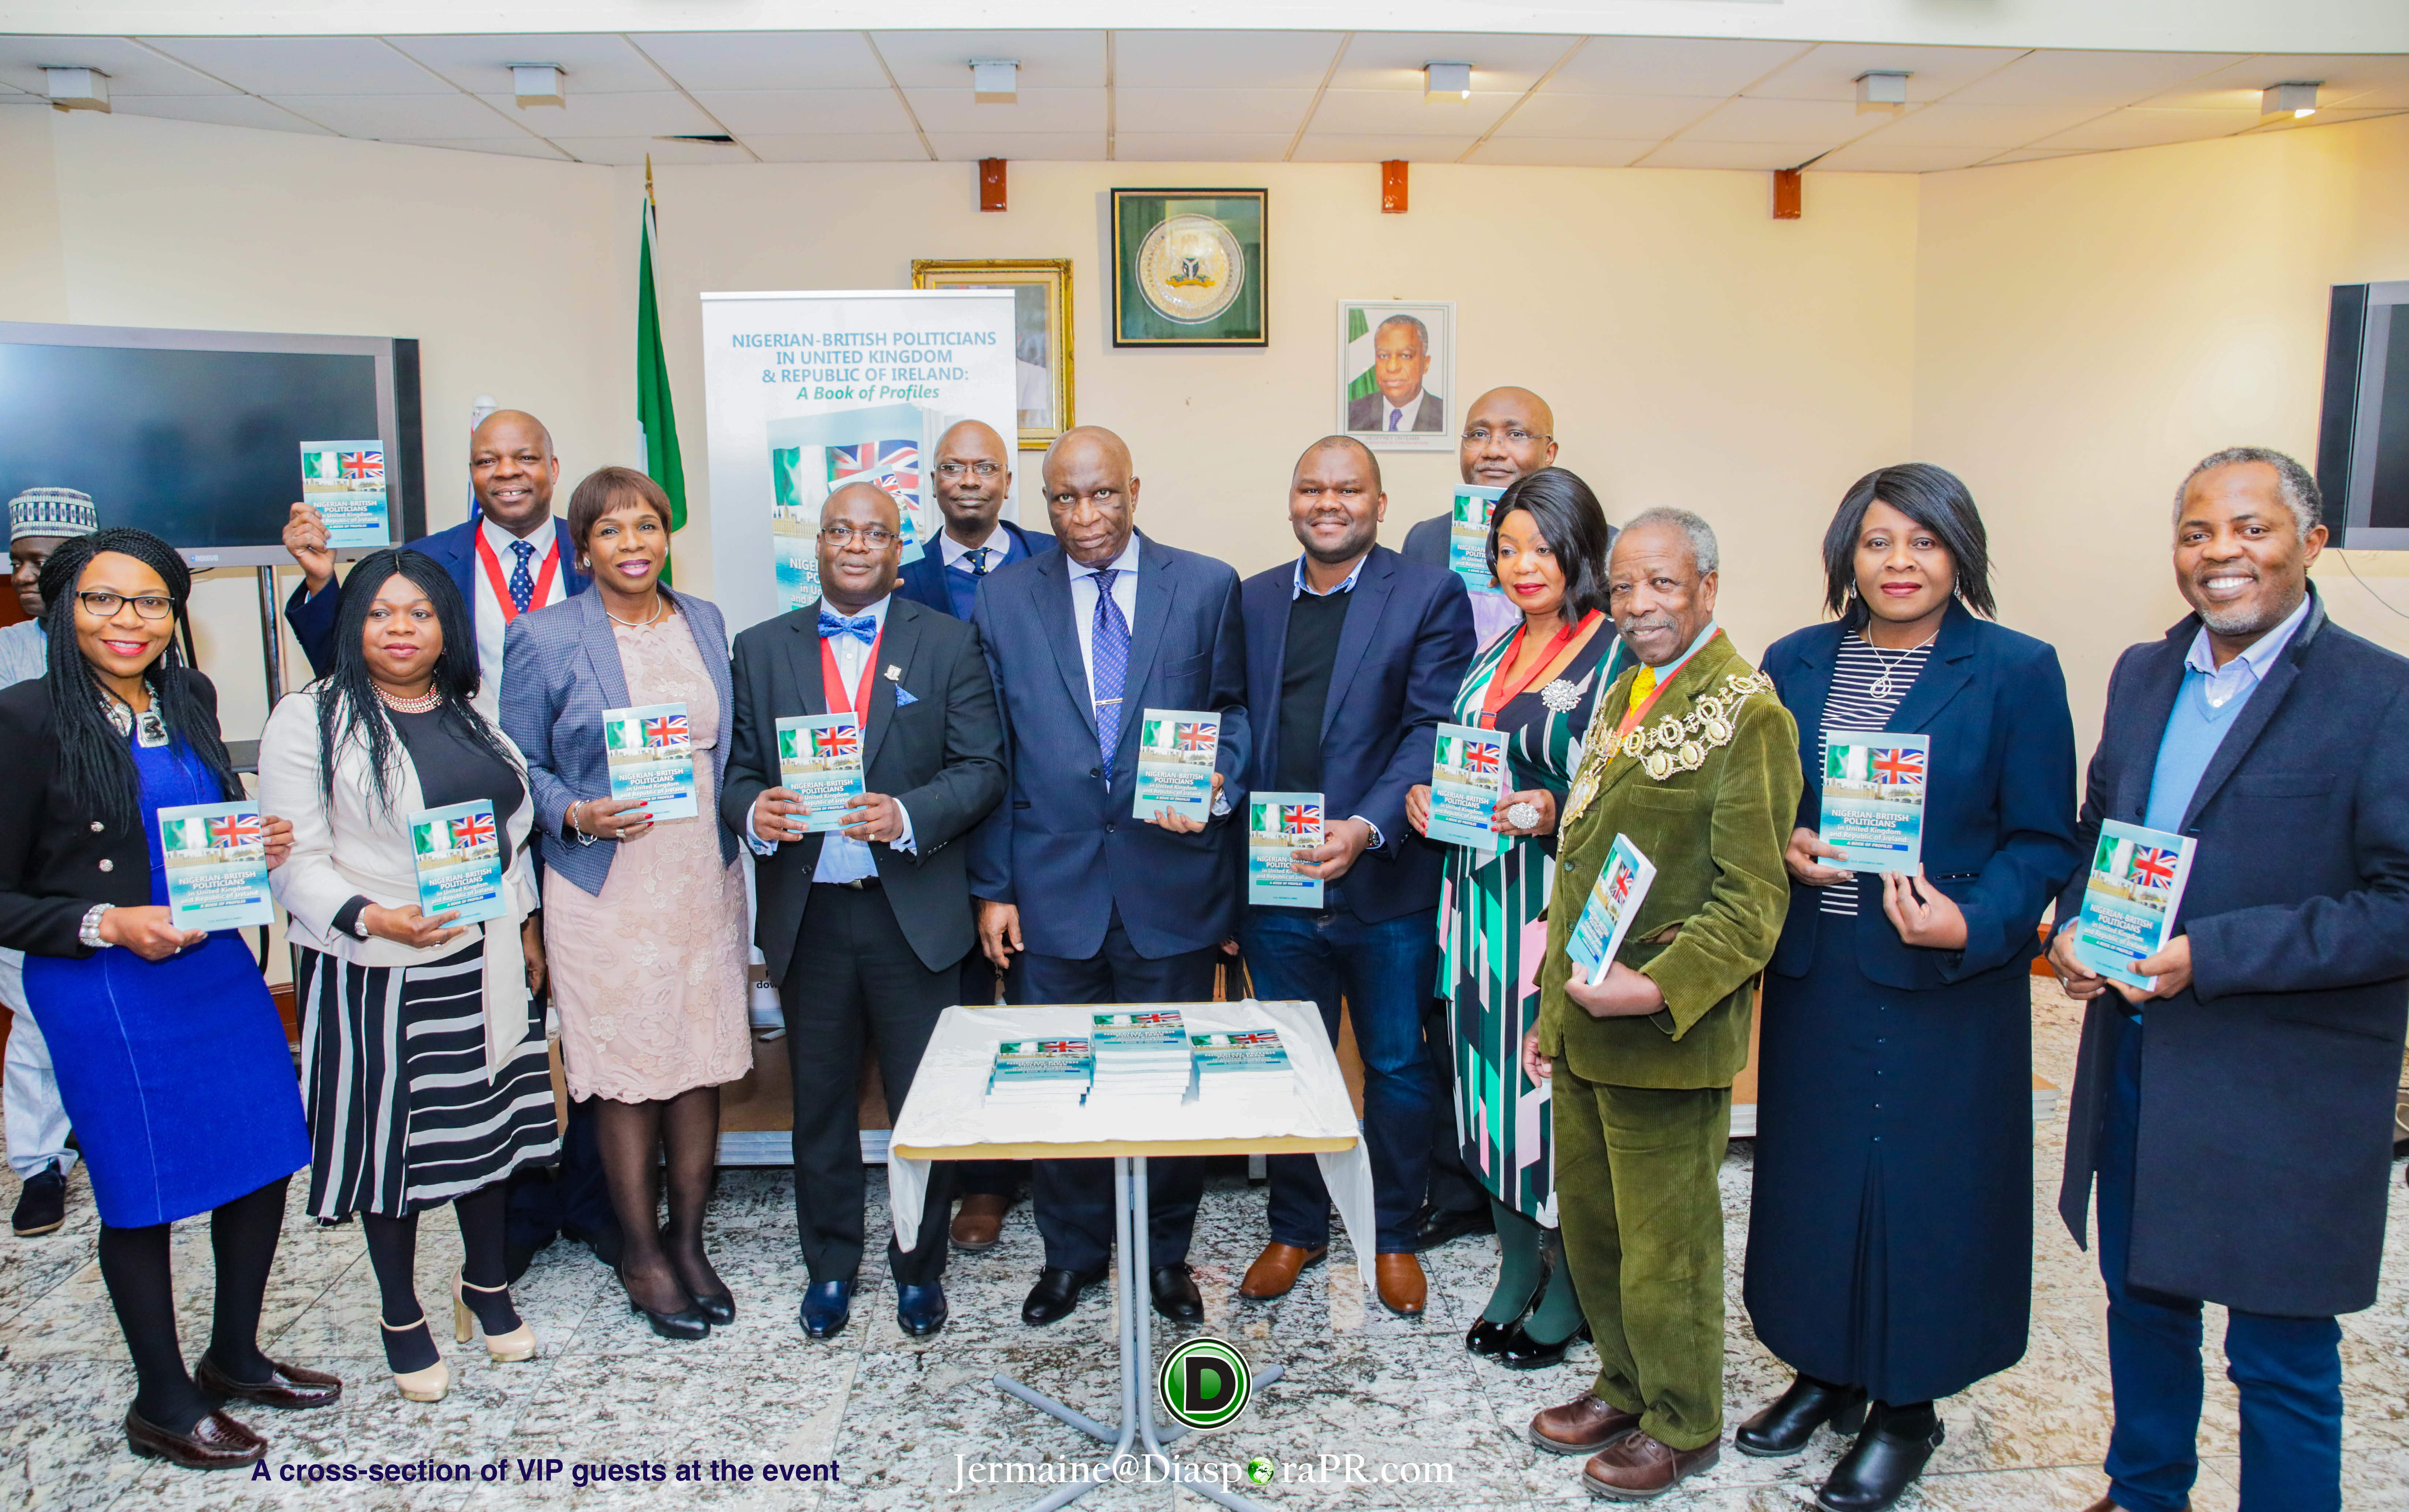 Book Review: Nigerian-British Politicians in the United Kingdom and Republic of Ireland: A Book of Profiles